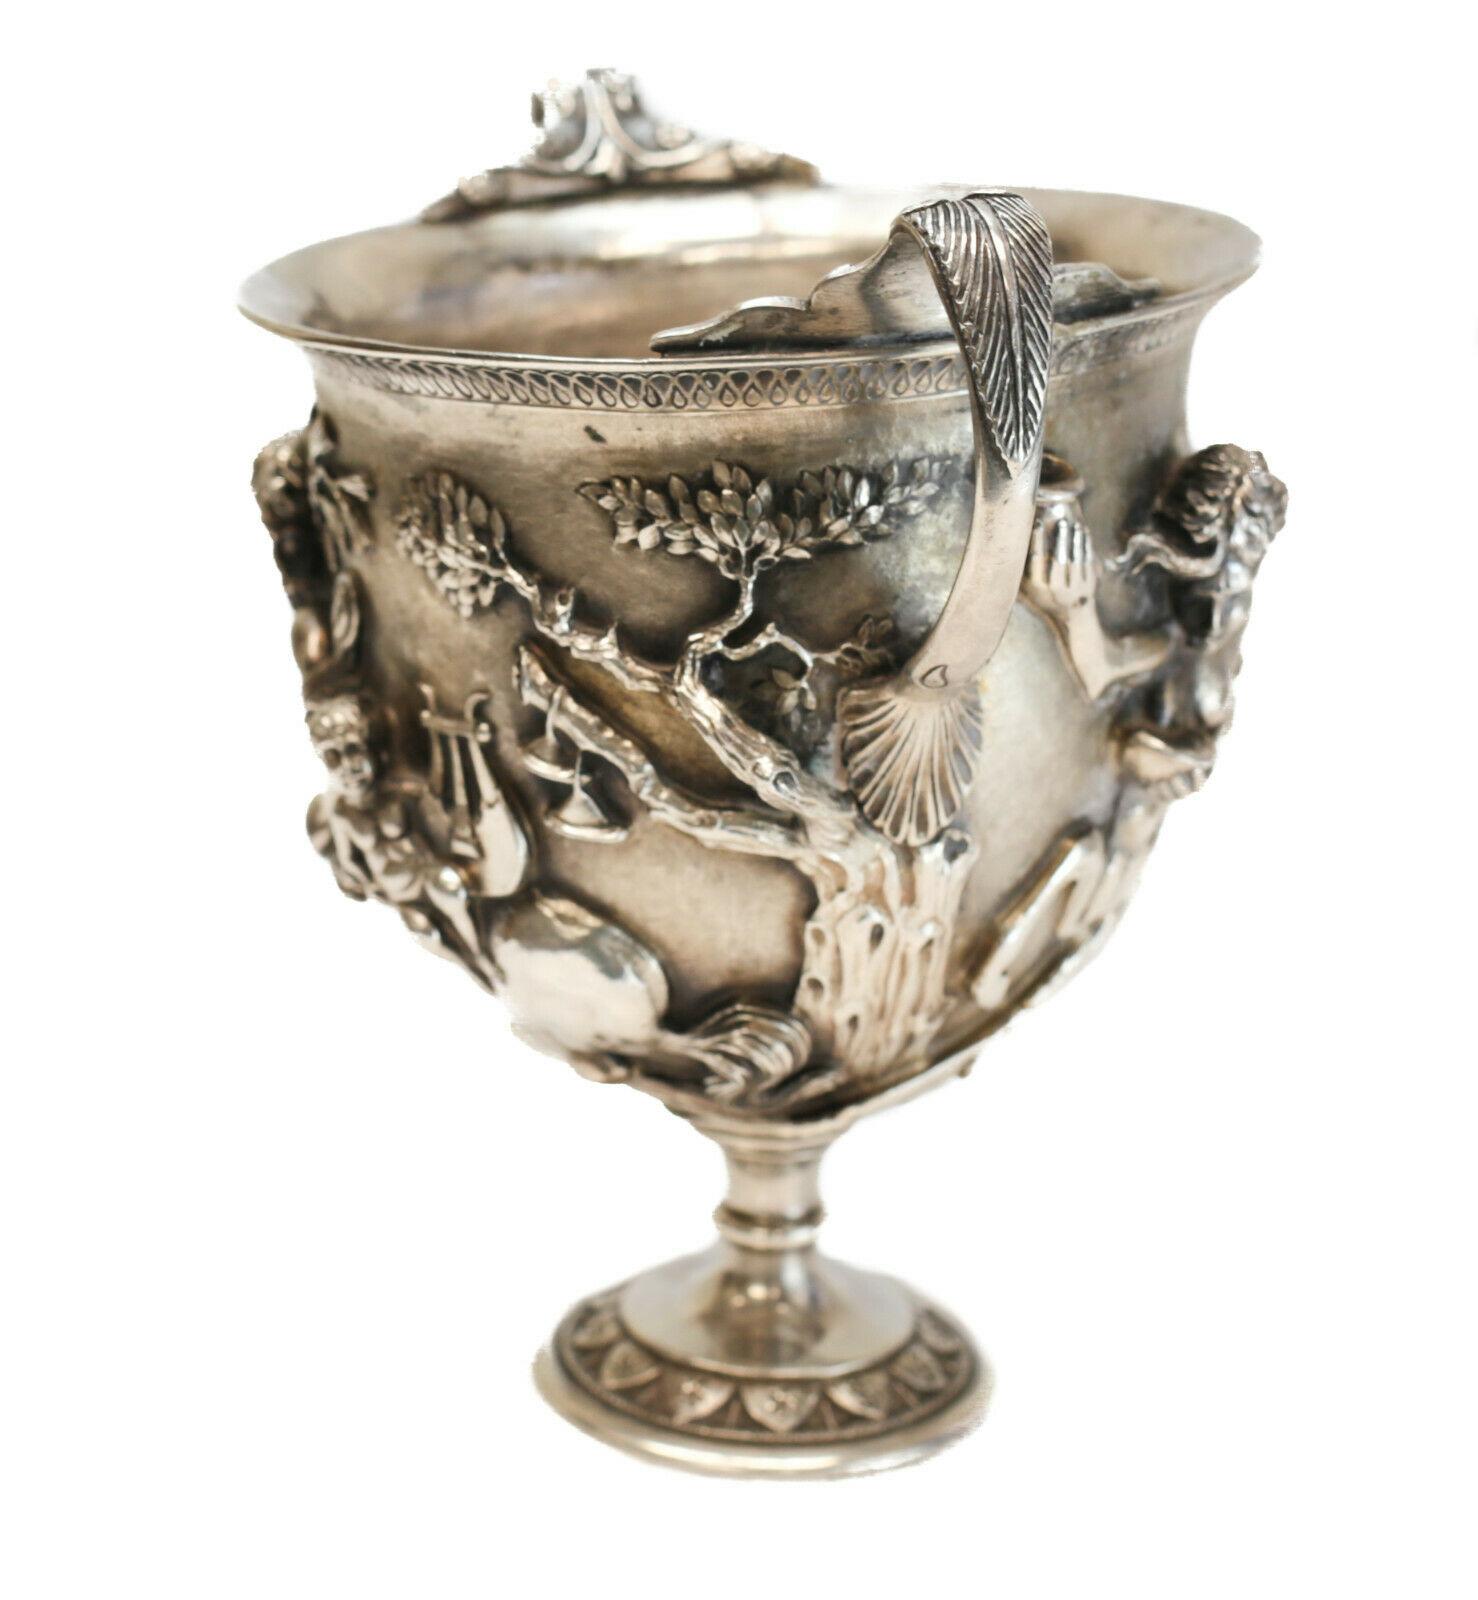 An extraordinary Italian sterling silver Kantharos cup with double handles, by famed silversmith Mabuti for Buccellati, circa 1970. Ornate satyrs and cherubsin deep relief to the central areas, with hand etched detailed throughout. Buccellati silver